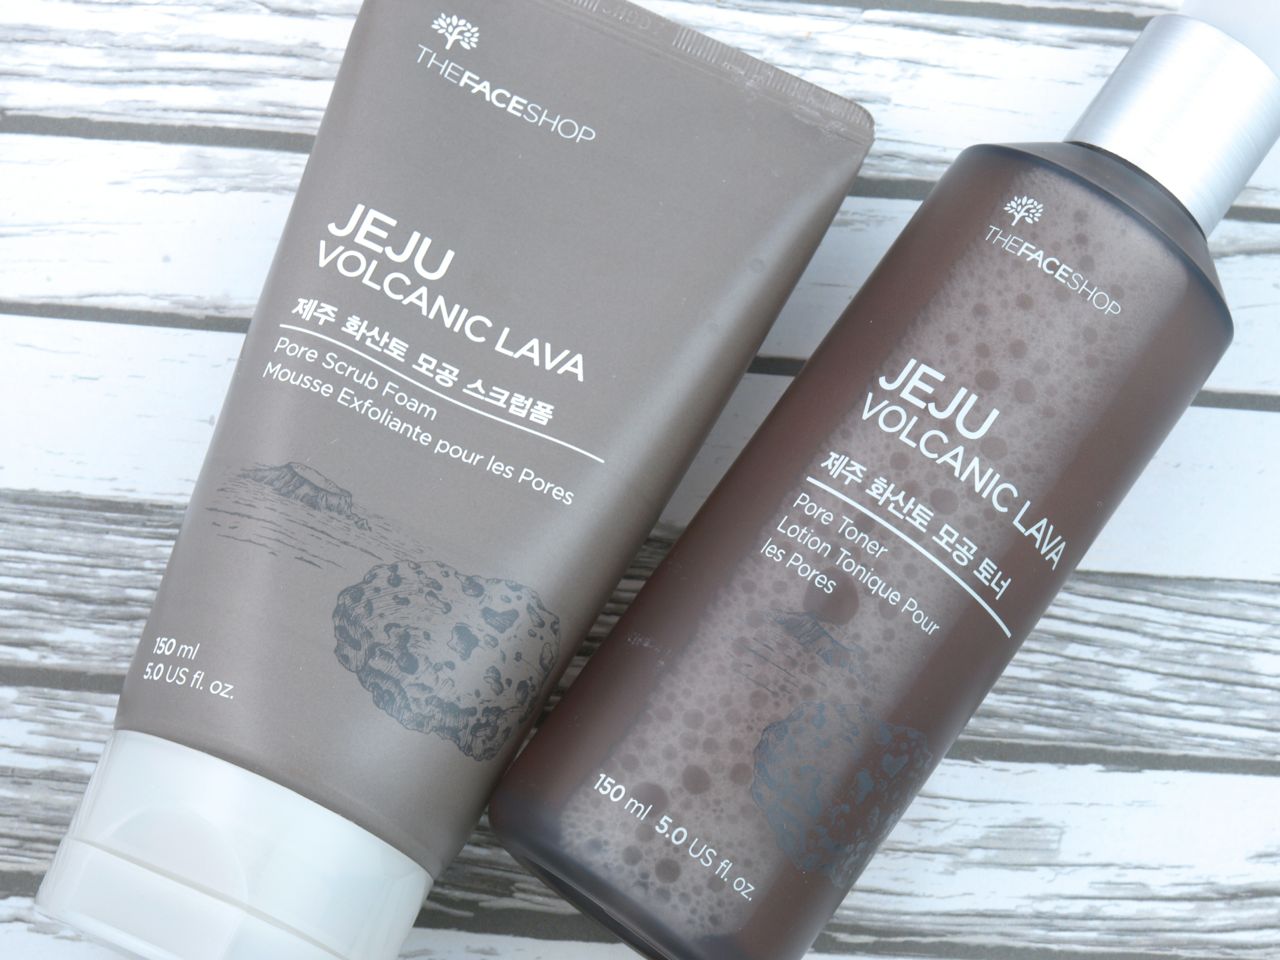 Jeju Volcanic Lava Products from Faceshop